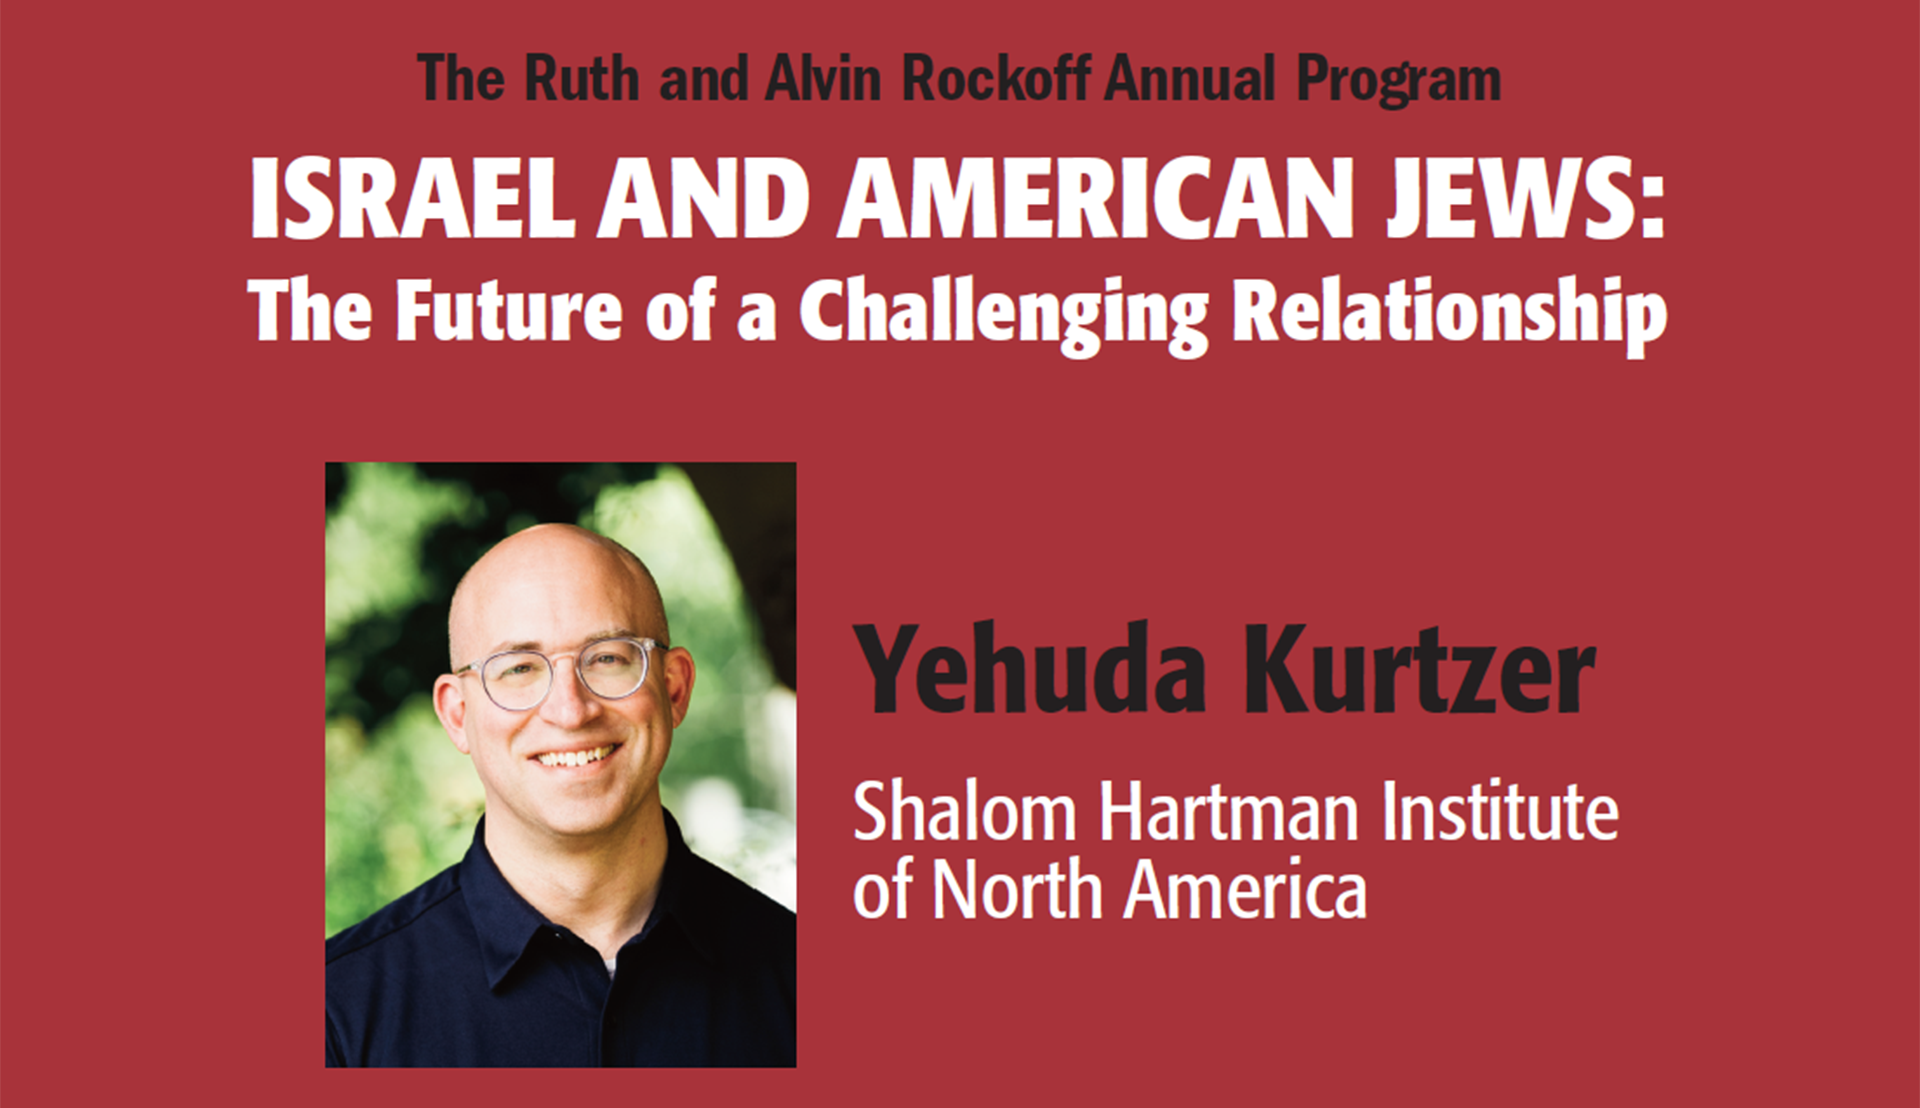 Rutgers Global - Israel and American Jews Lecture Event